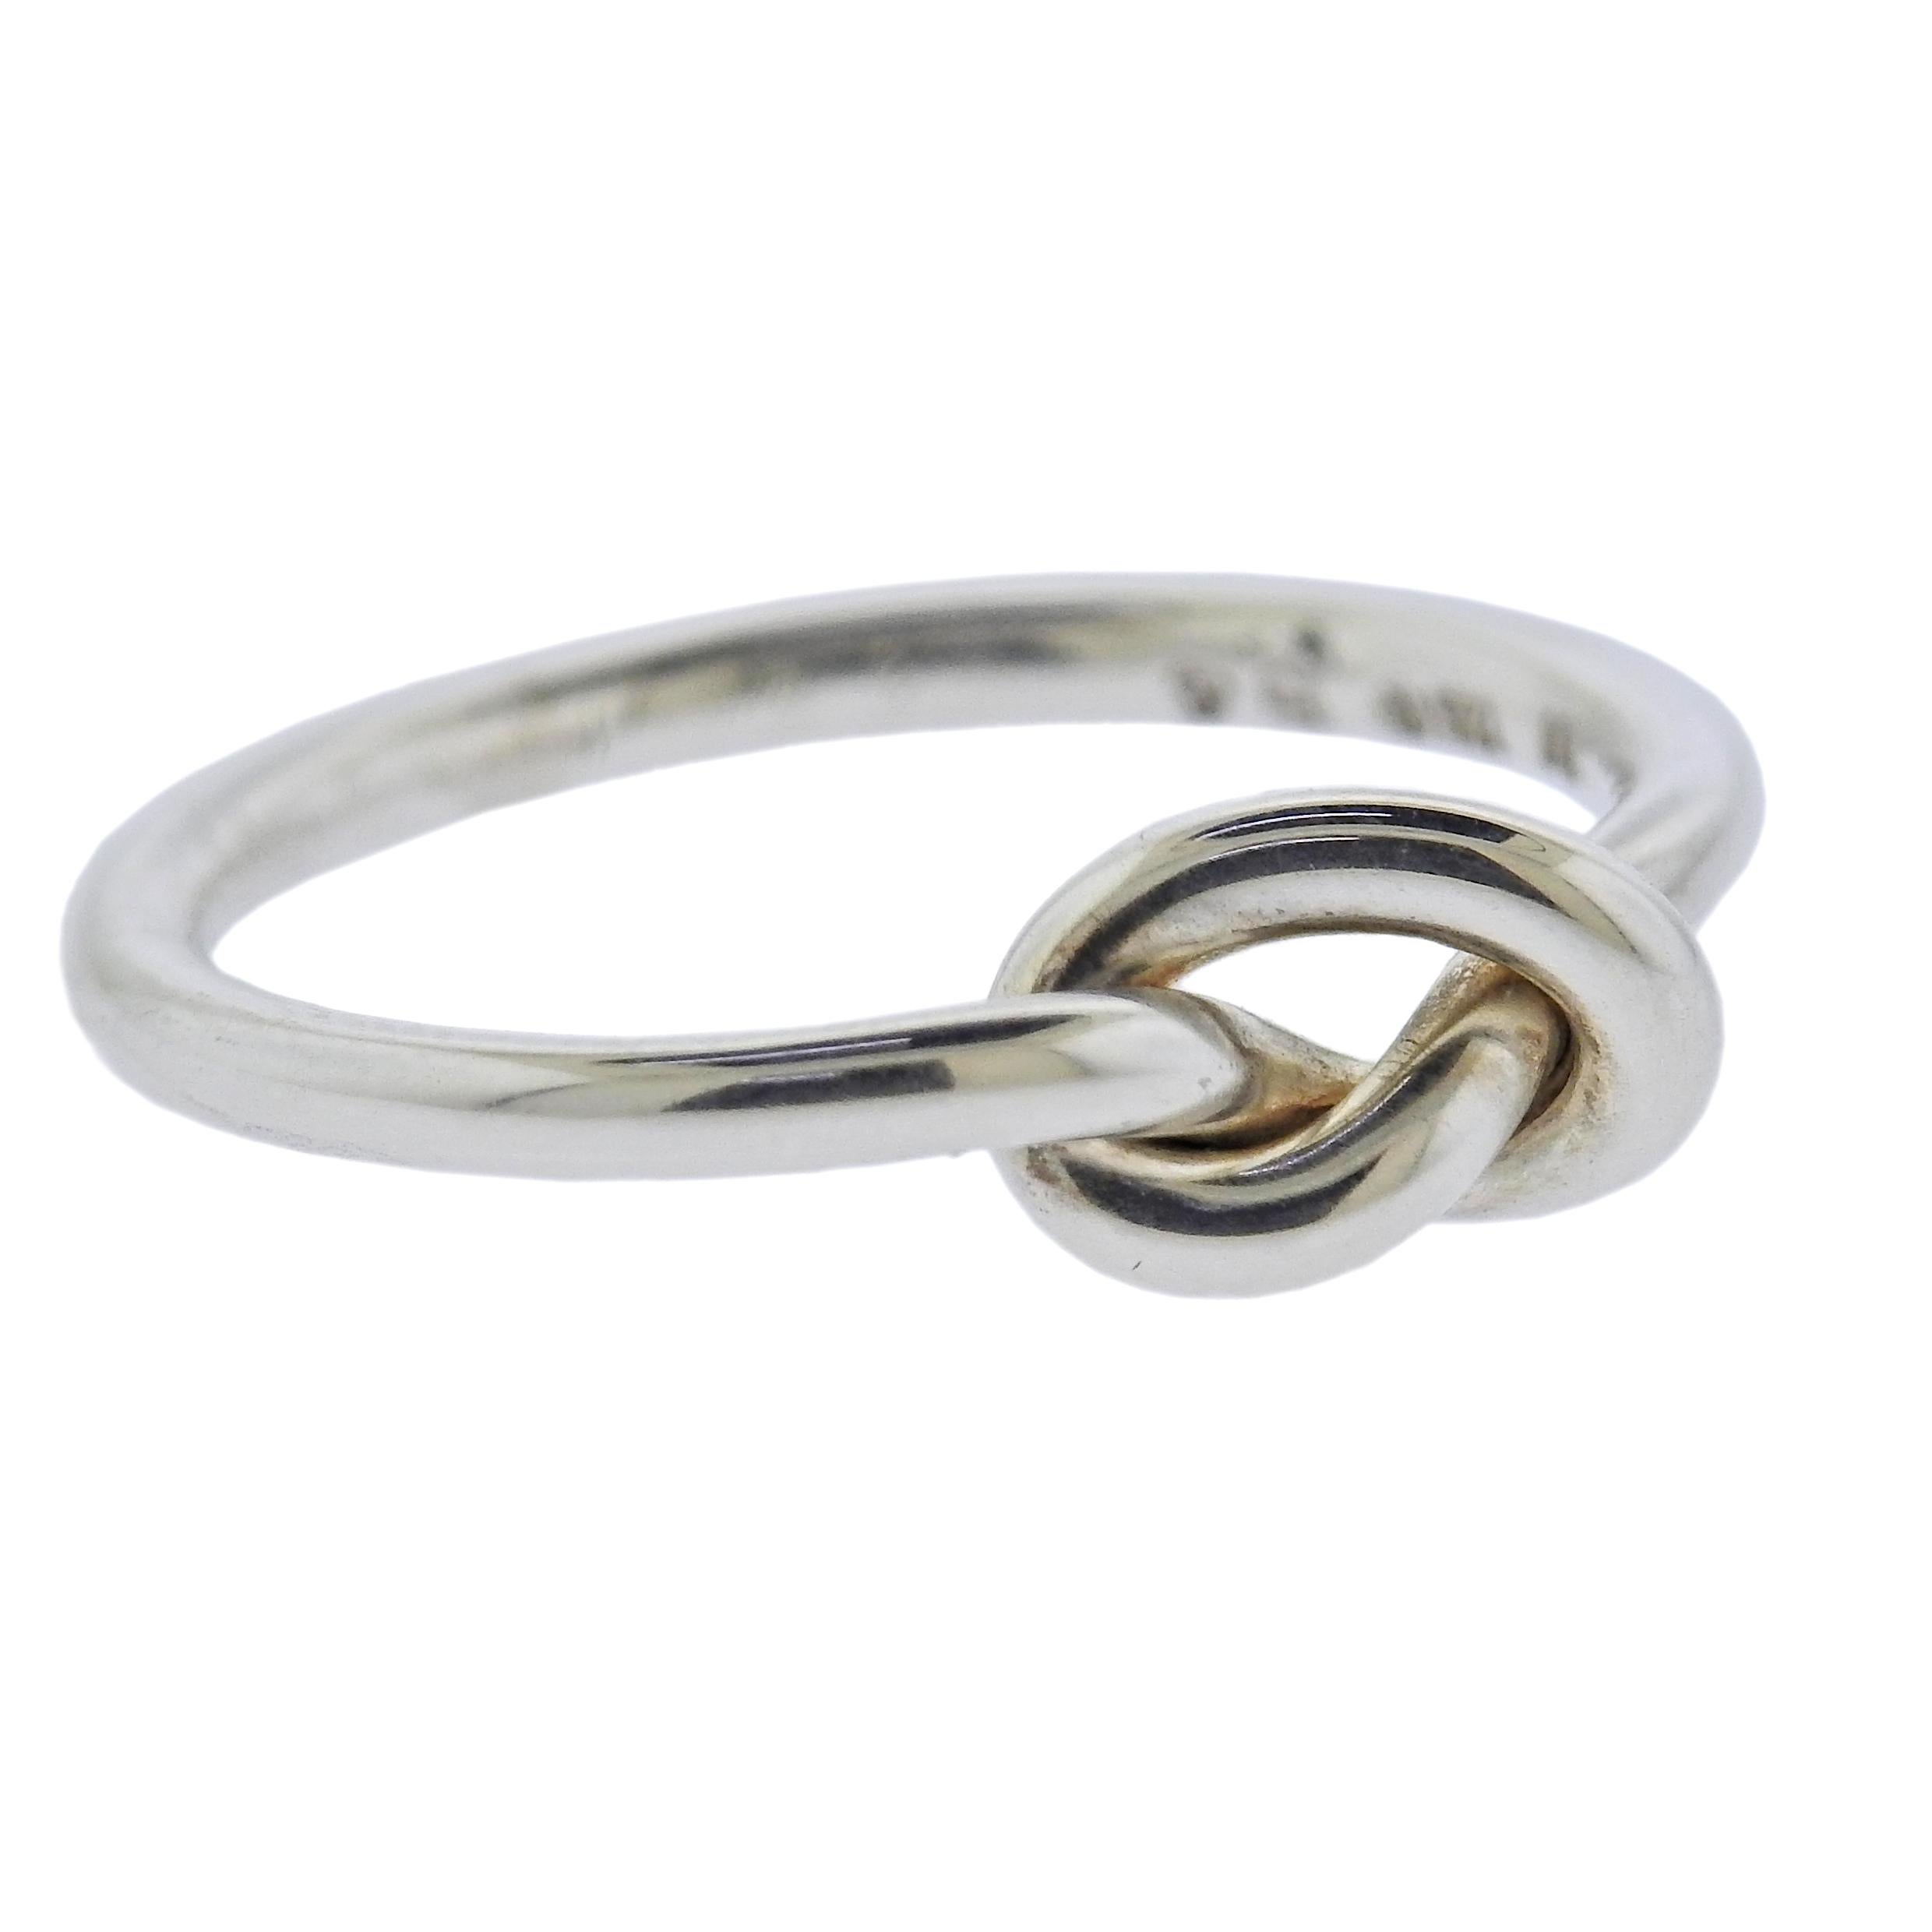 Brand new Georg Jensen sterling silver single Love Knot ring. Knot is 6mm x 9mm.  Ring is available in sizes 53 and 54. Model # 10003871. Marked: GJ 925 S, A44B. Weight - 2.5 grams.